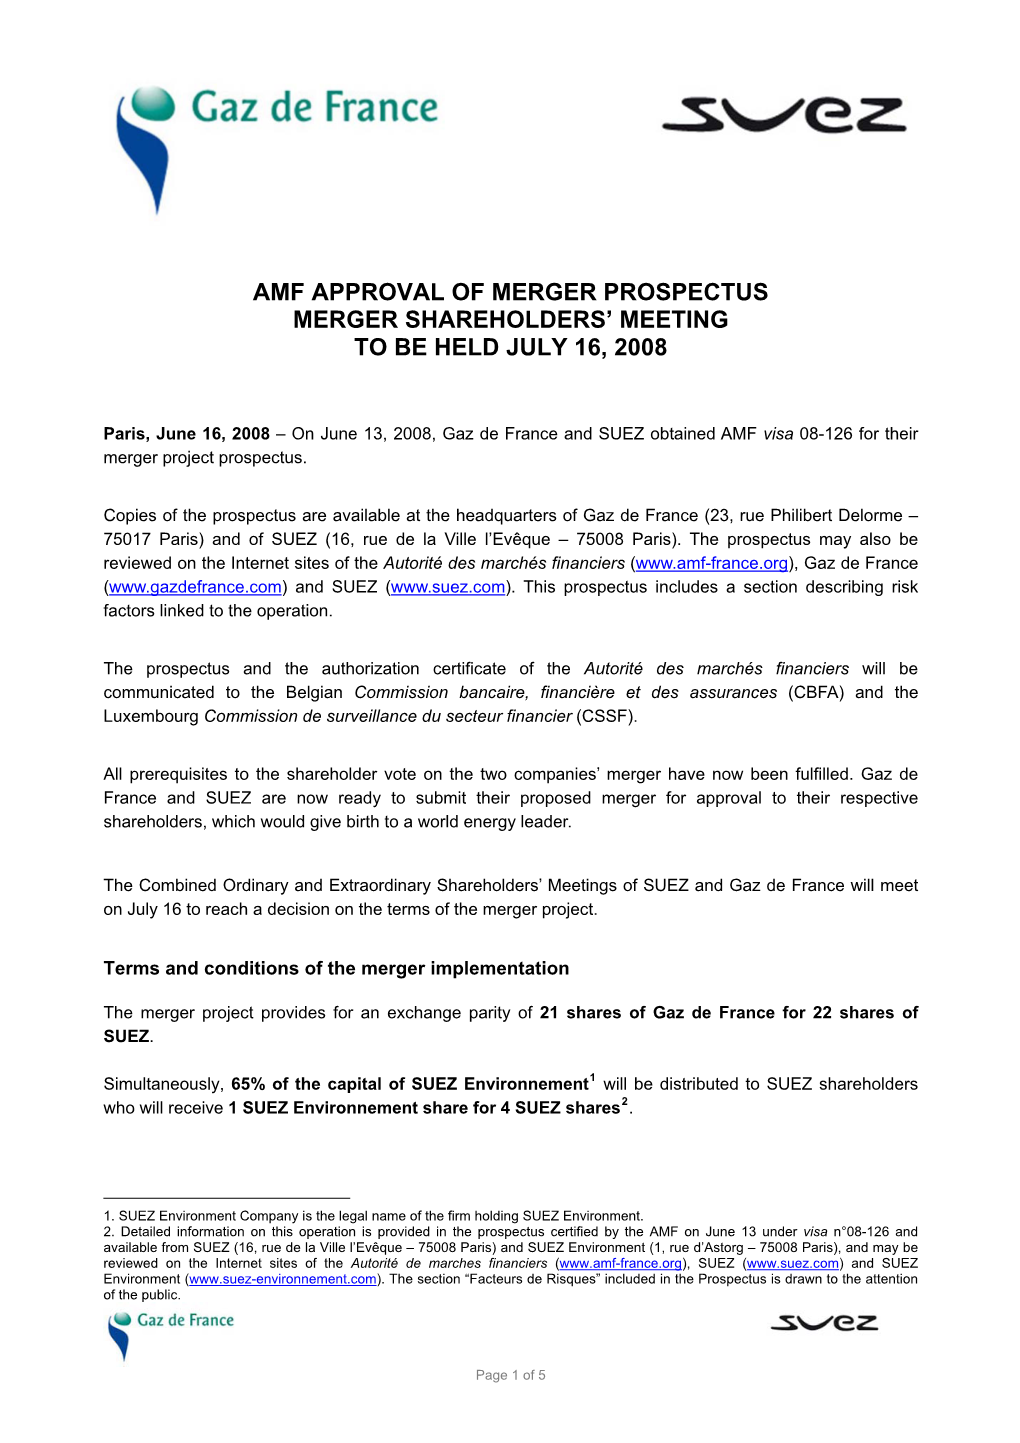 Amf Approval of Merger Prospectus Merger Shareholders' Meeting to Be Held July 16, 2008